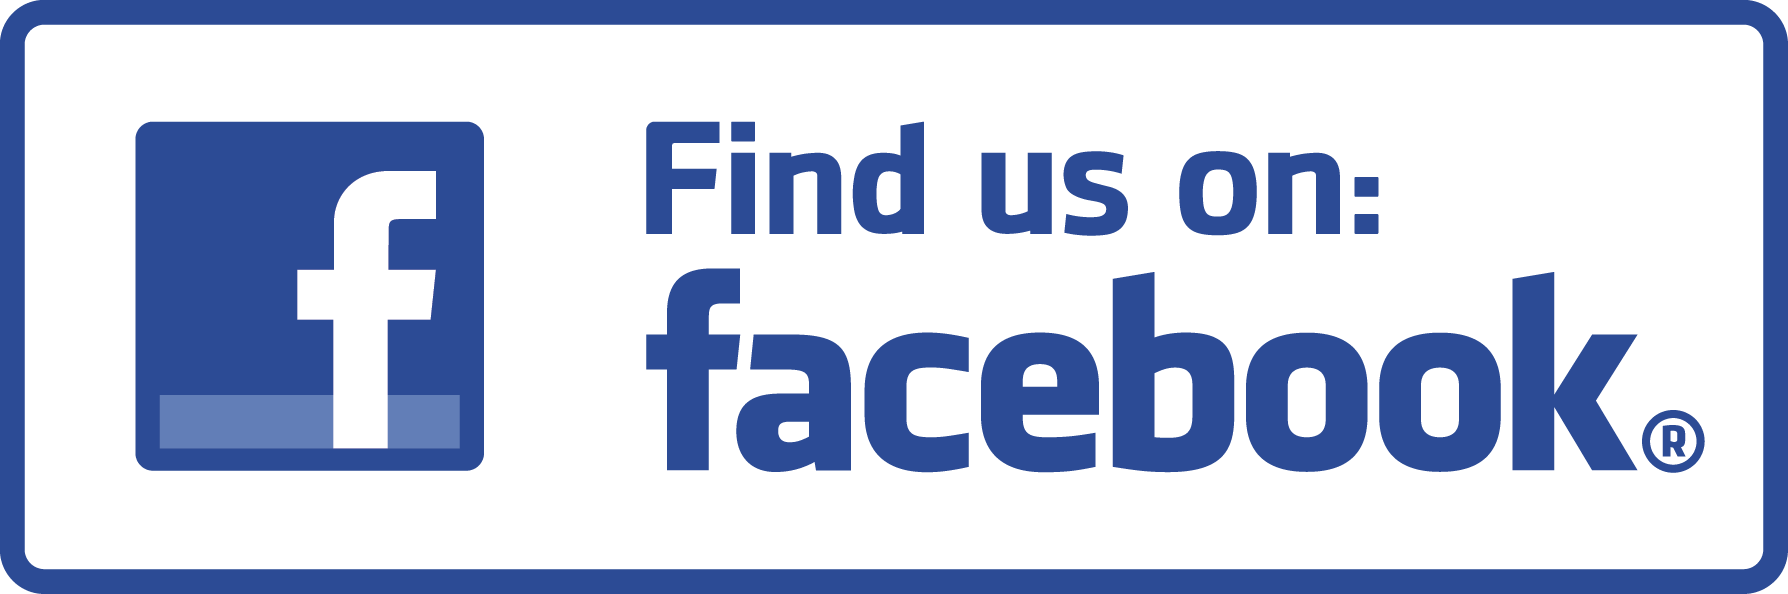 New Company Facebook Page Launched